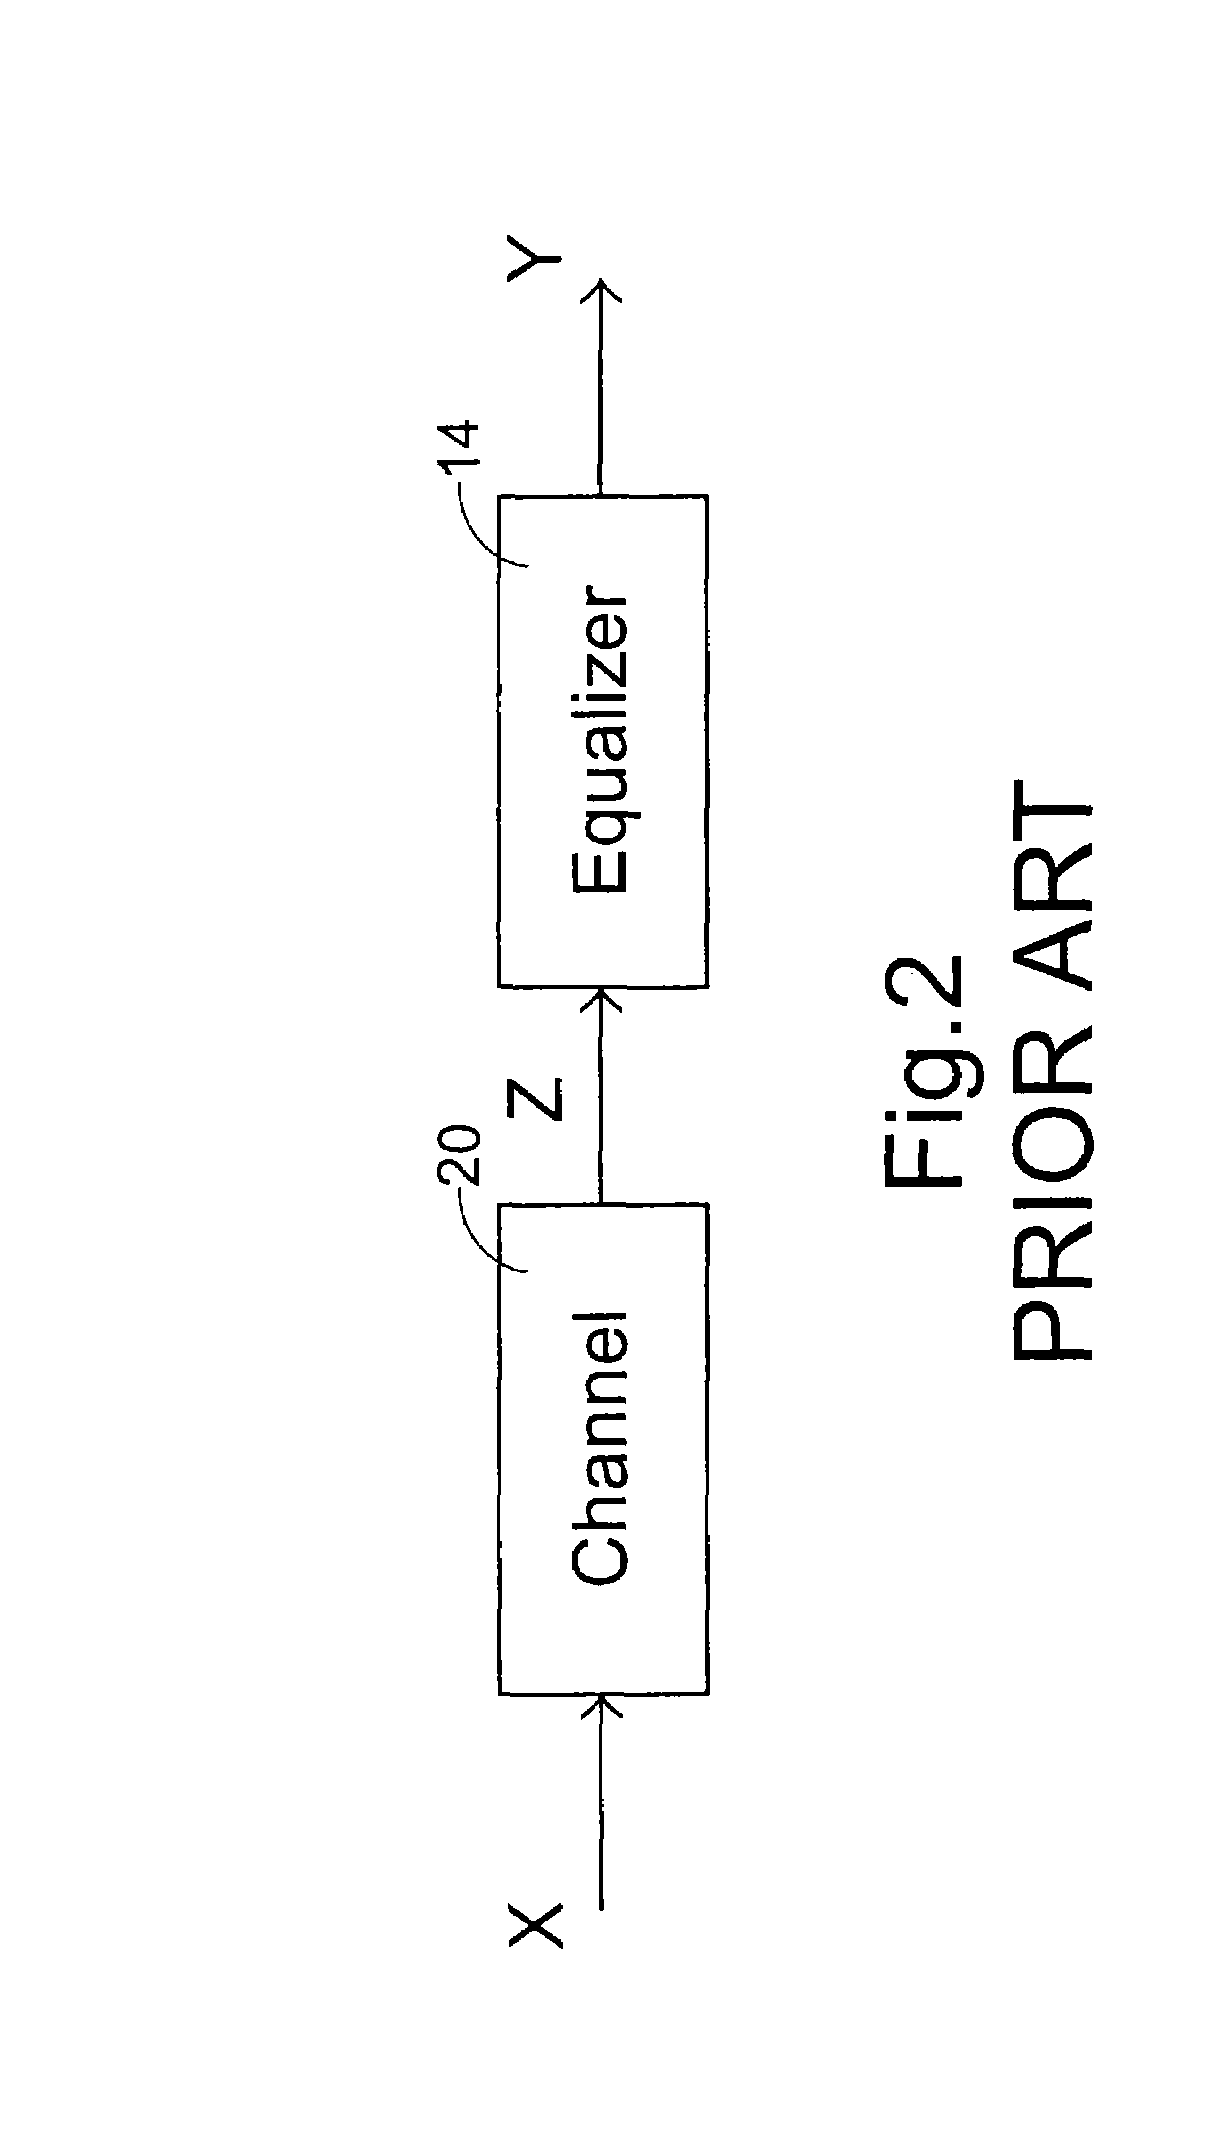 Viterbi decoding device and method for processing multi-data input into multi-data output